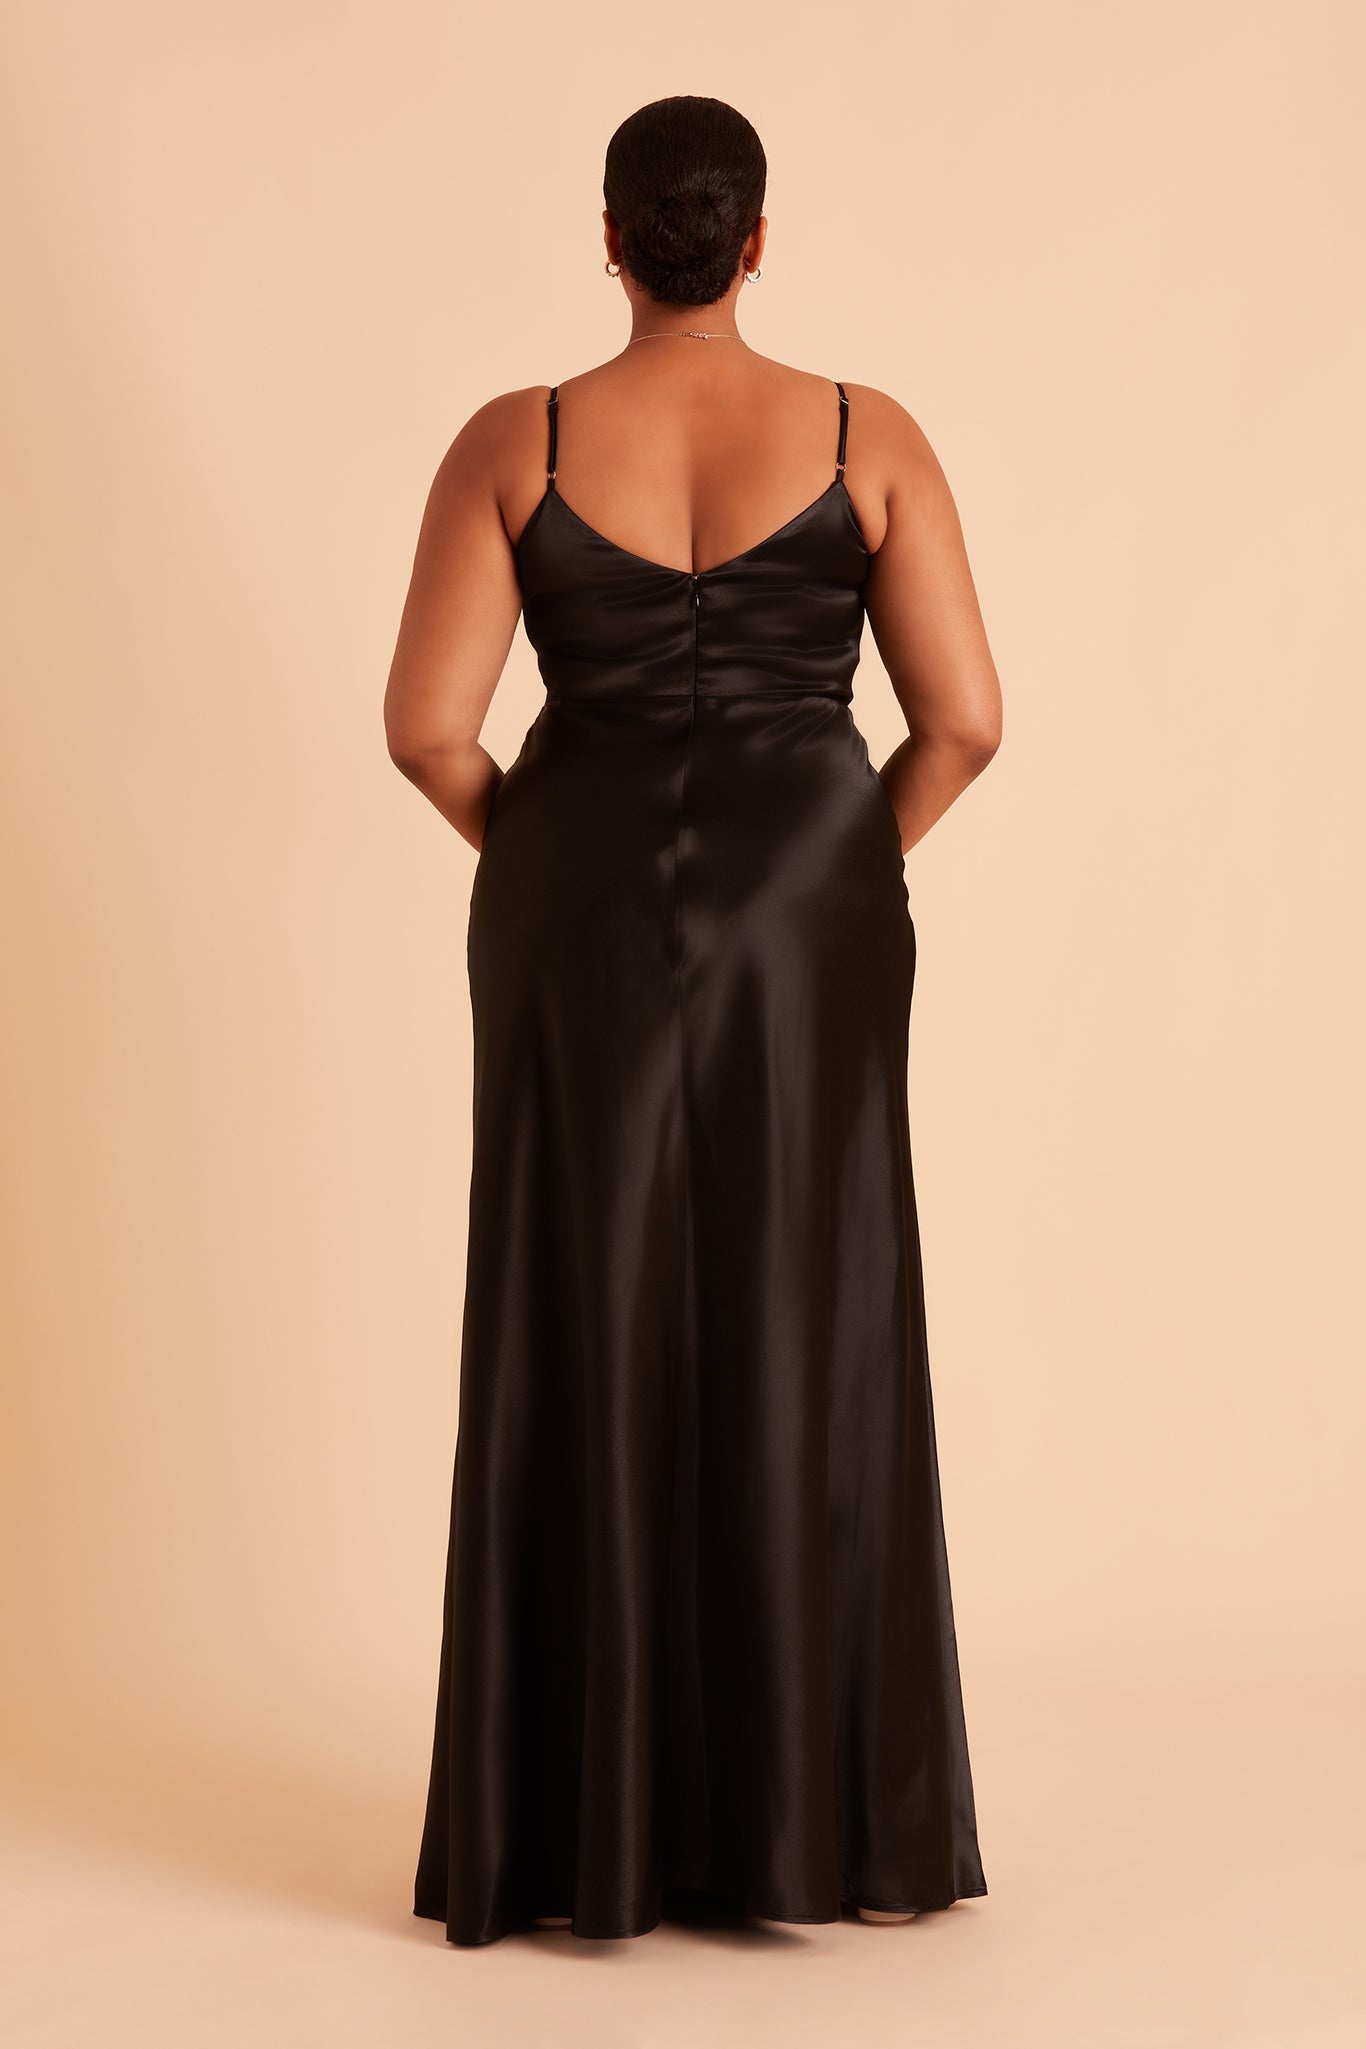 Jay plus size bridesmaid dress with slit in black satin by Birdy Grey, back view